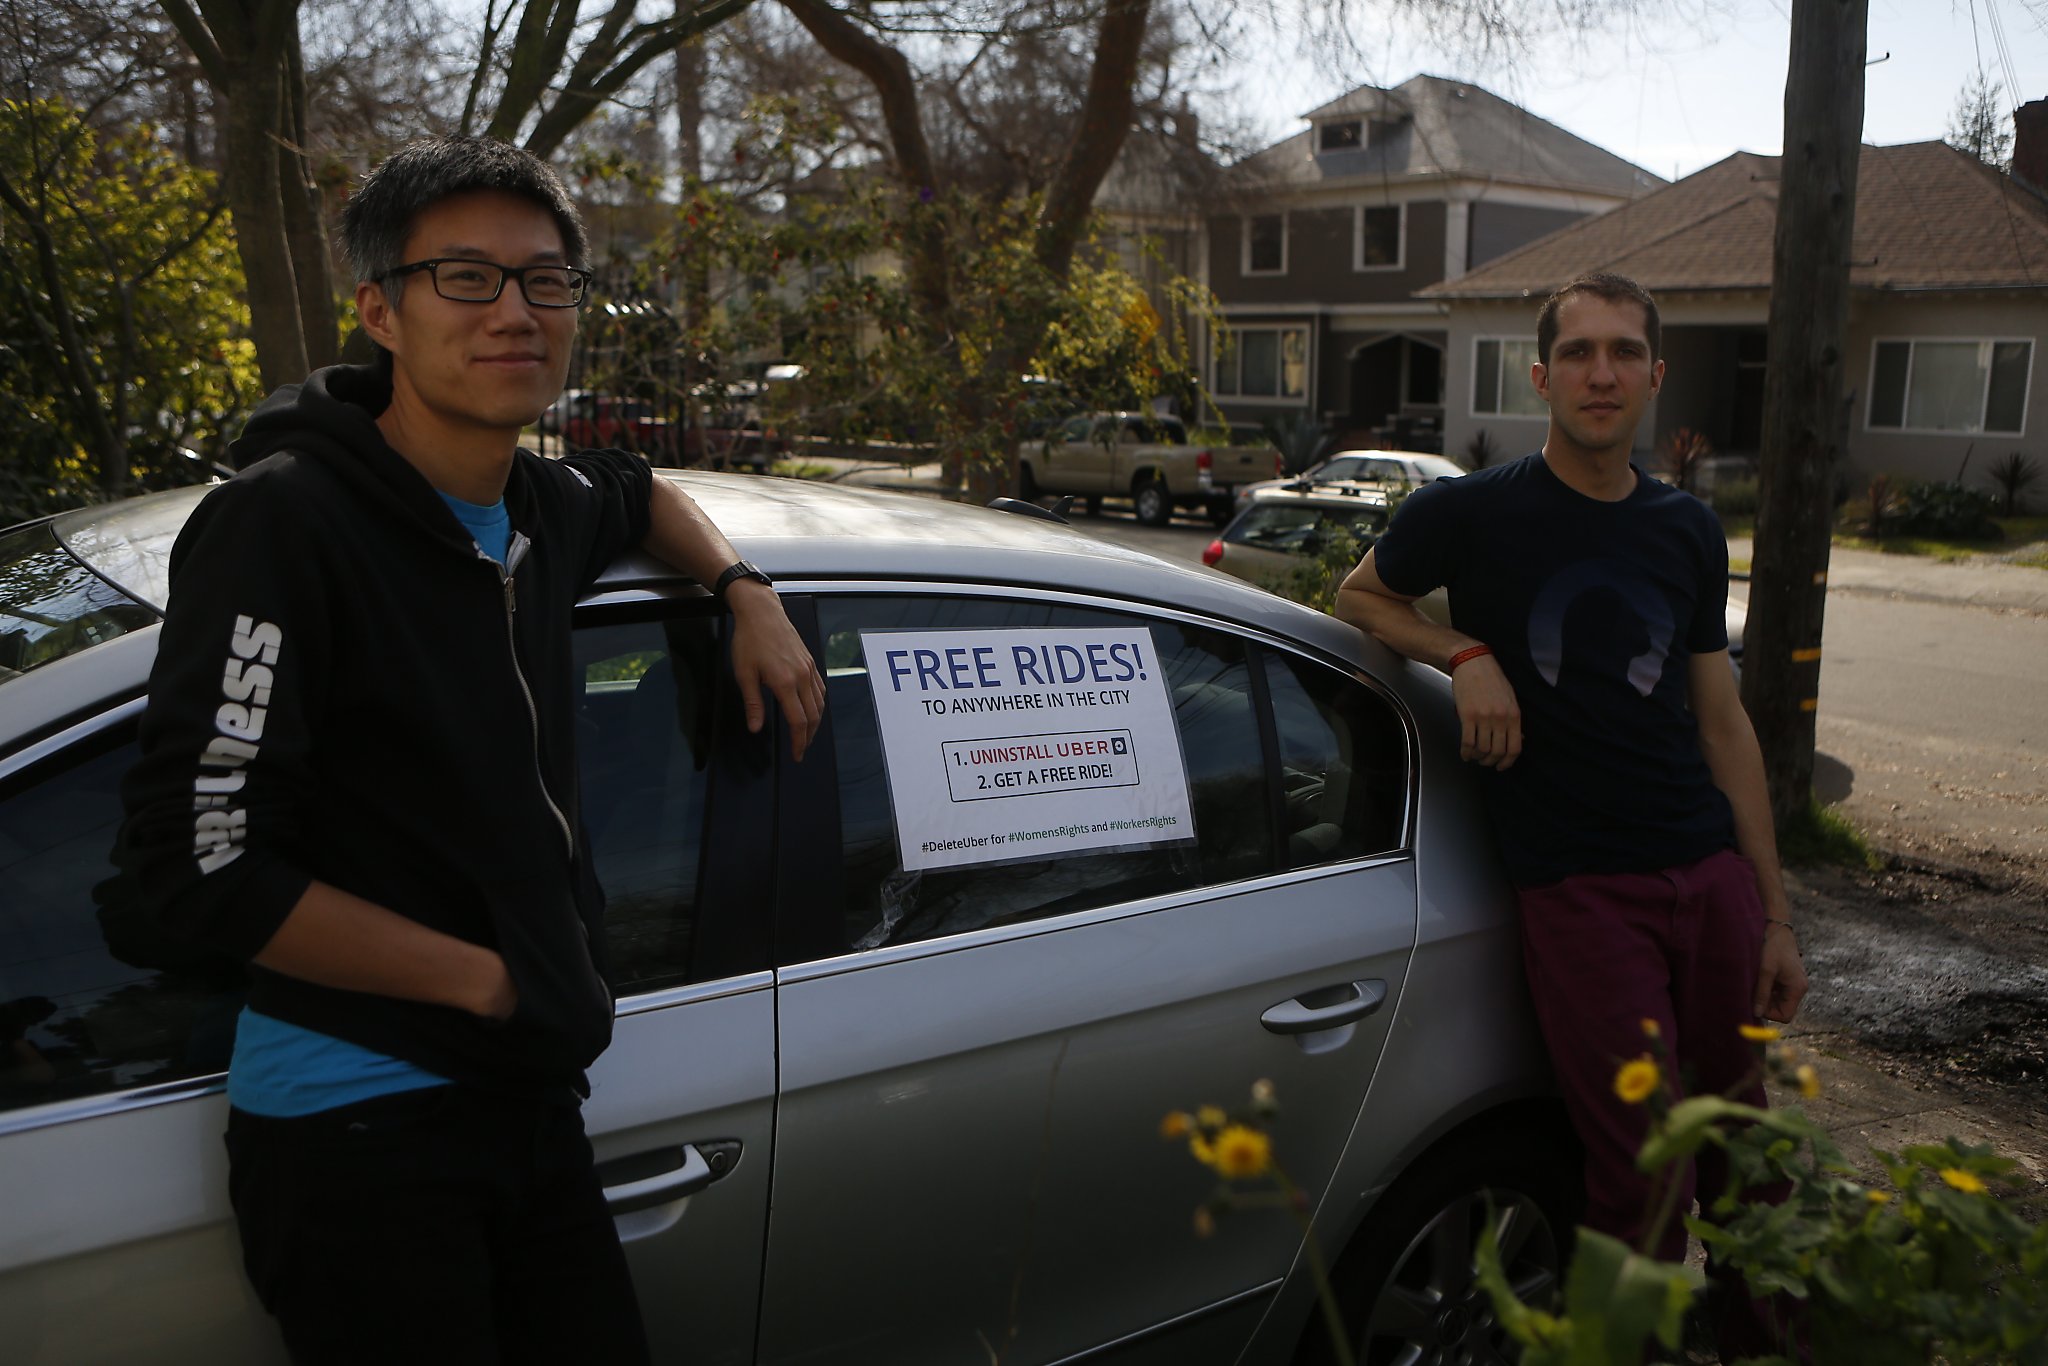 SF man offers free rides to passengers who #DeleteUber - San Francisco Chronicle